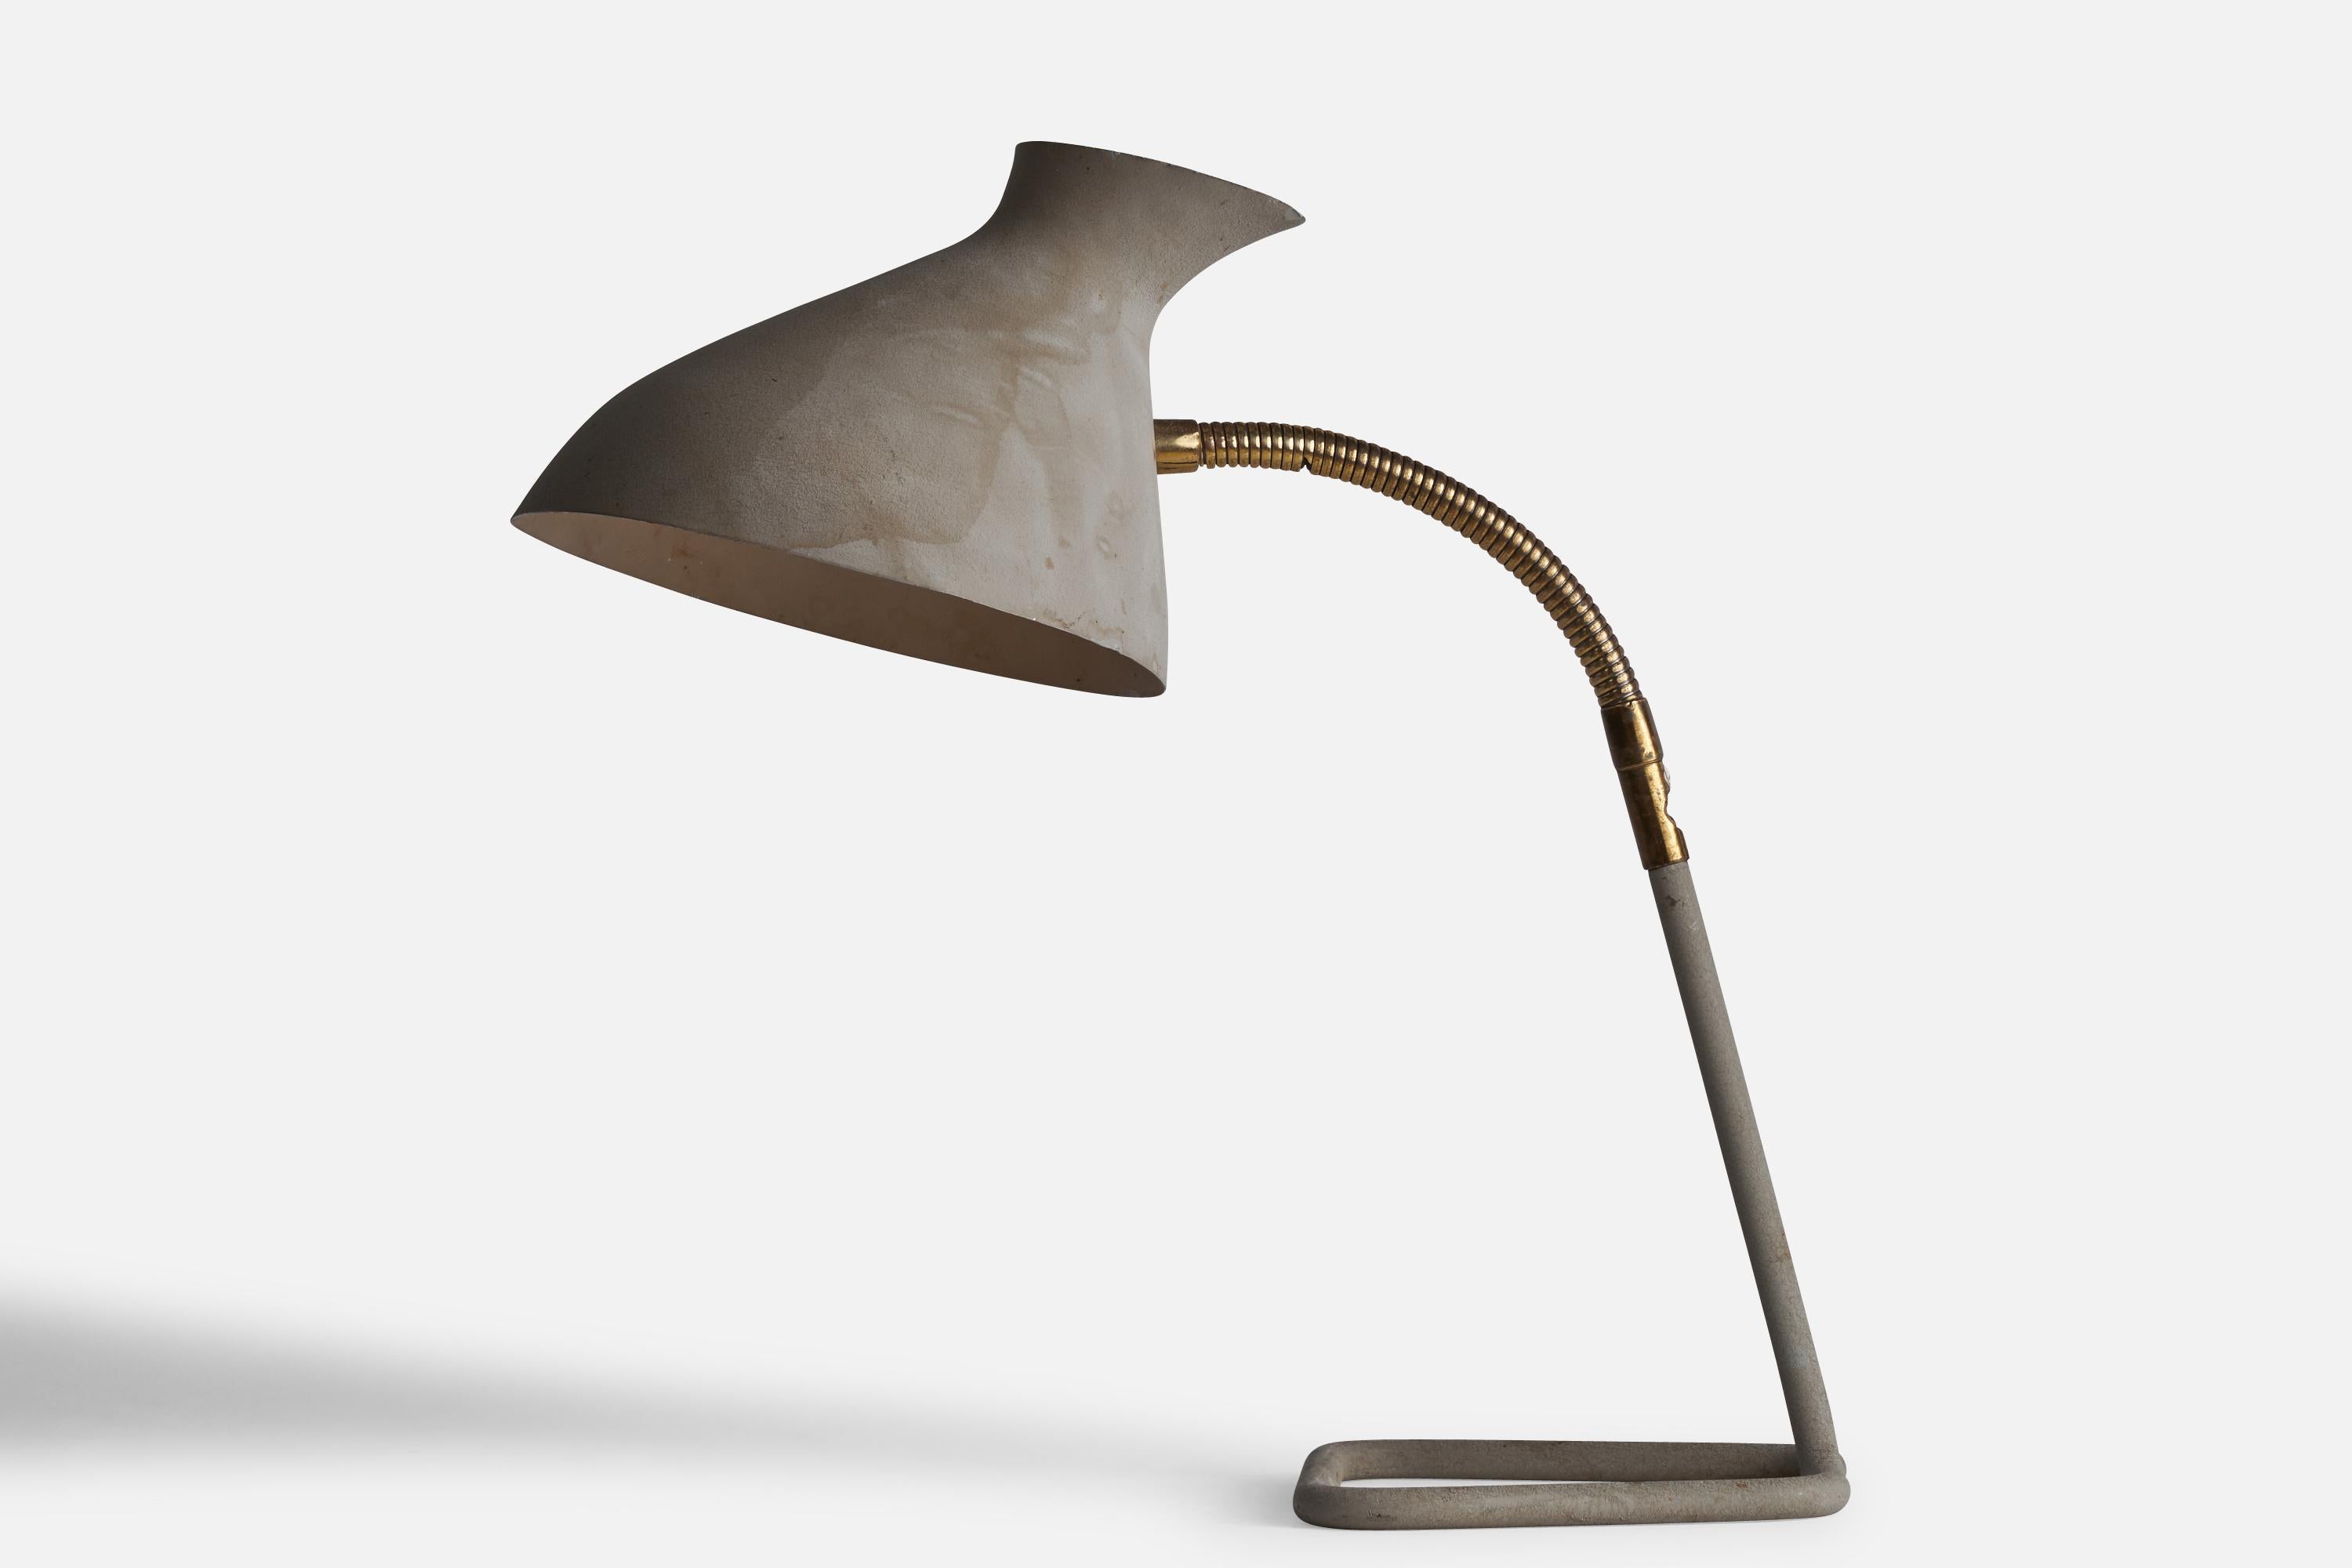 An adjustable brass, grey-painted metal and iron table lamp designed and produced by HW Armature, Sweden, 1950s.

Please note cord feeds from middle of stem where iron and brass connects.
Overall Dimensions (inches): 15” H x 7.5